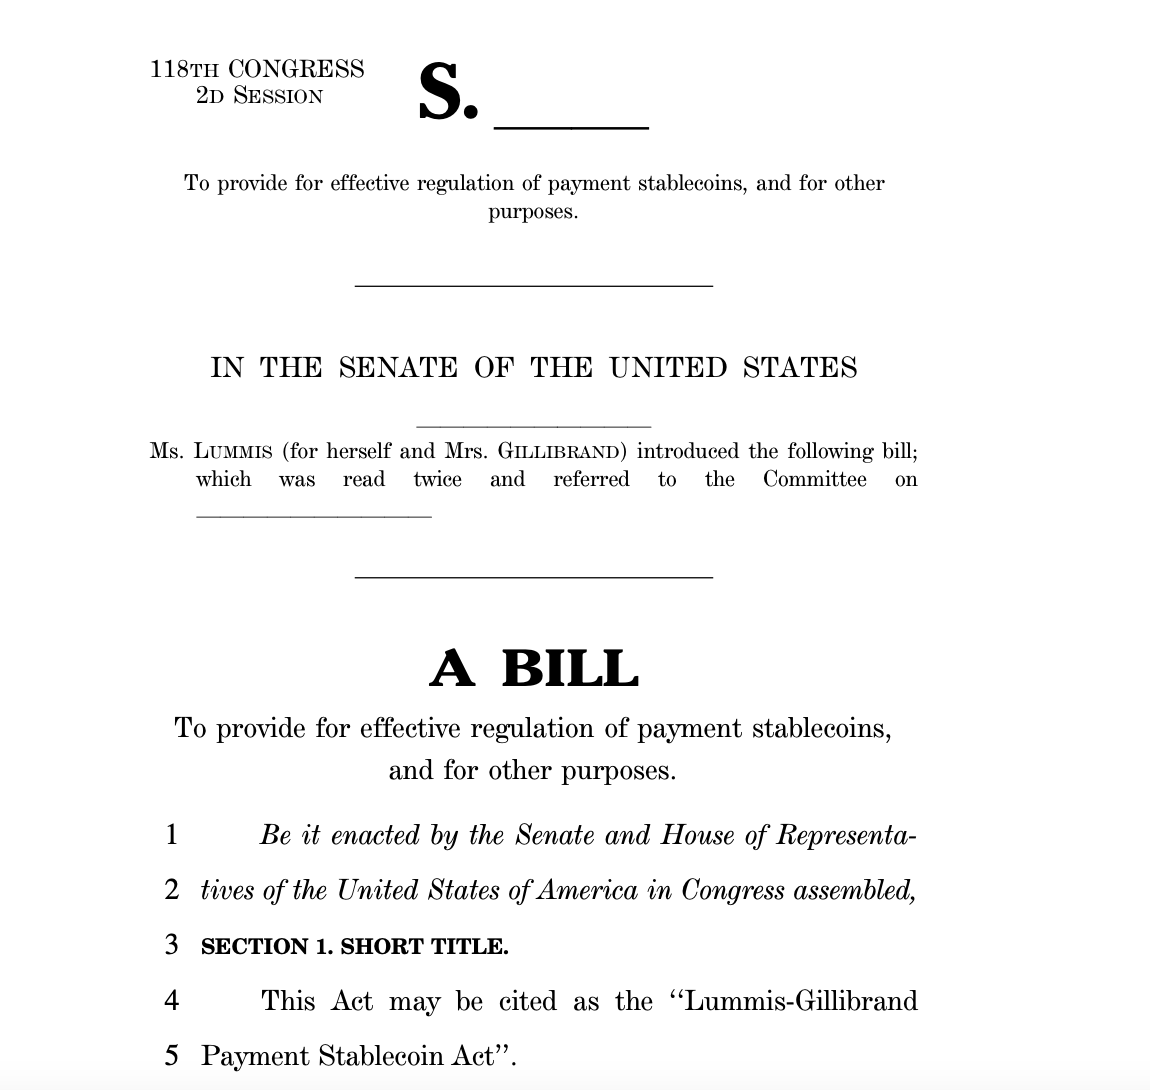 Today, Senators @SenLummis and @gillibrandny released the Lummis-Gillibrand Payment Stablecoin Act. We believe it’s crucial for the US to maintain its leadership role, prioritize innovation, and keep tech a bipartisan issue. We appreciate that lawmakers are working on this…